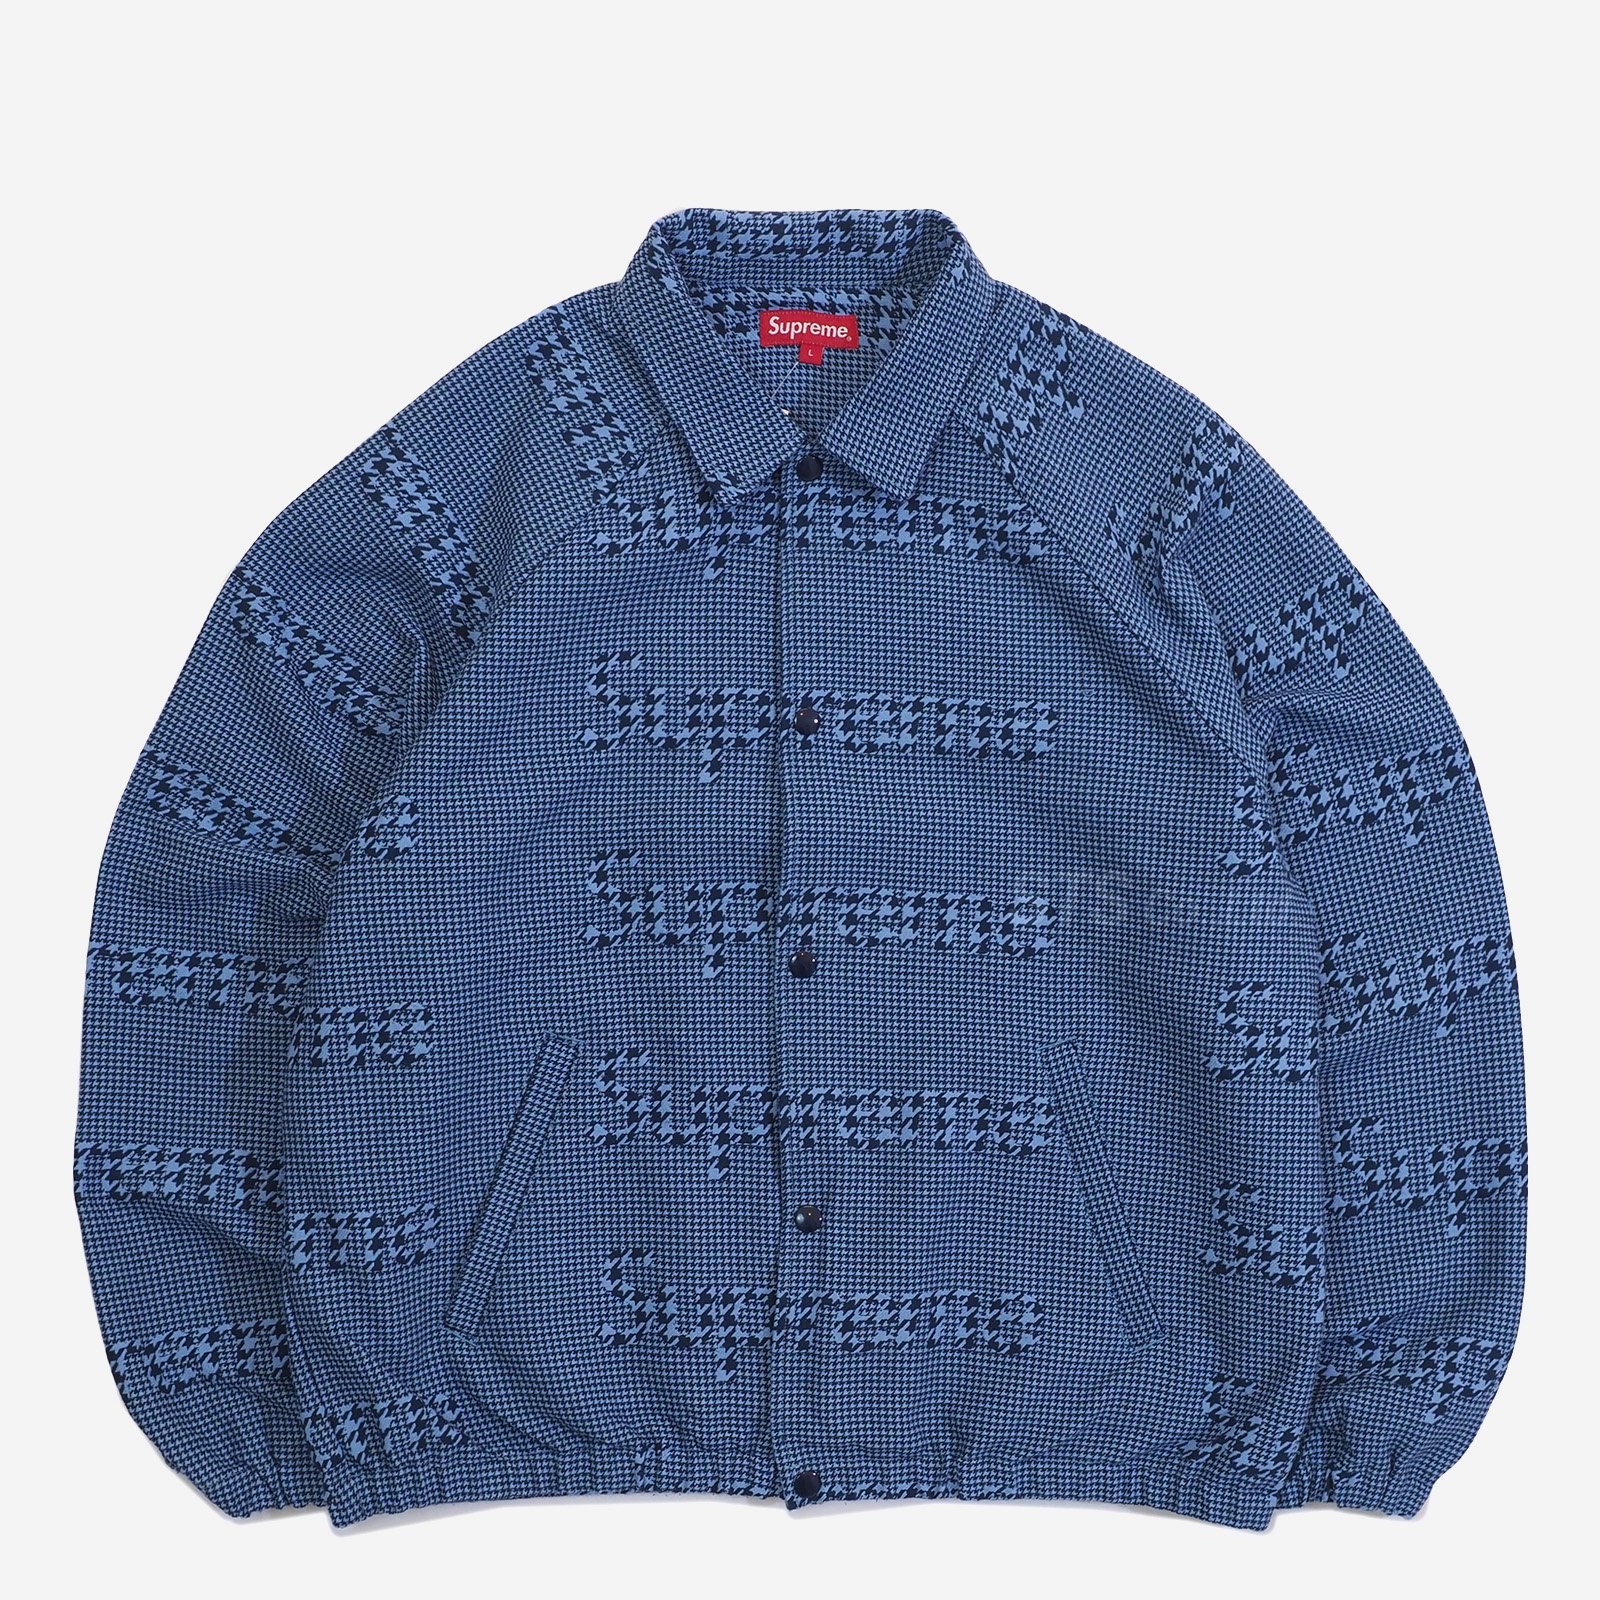 Supreme Houndstooth Logos Snap セットアップ